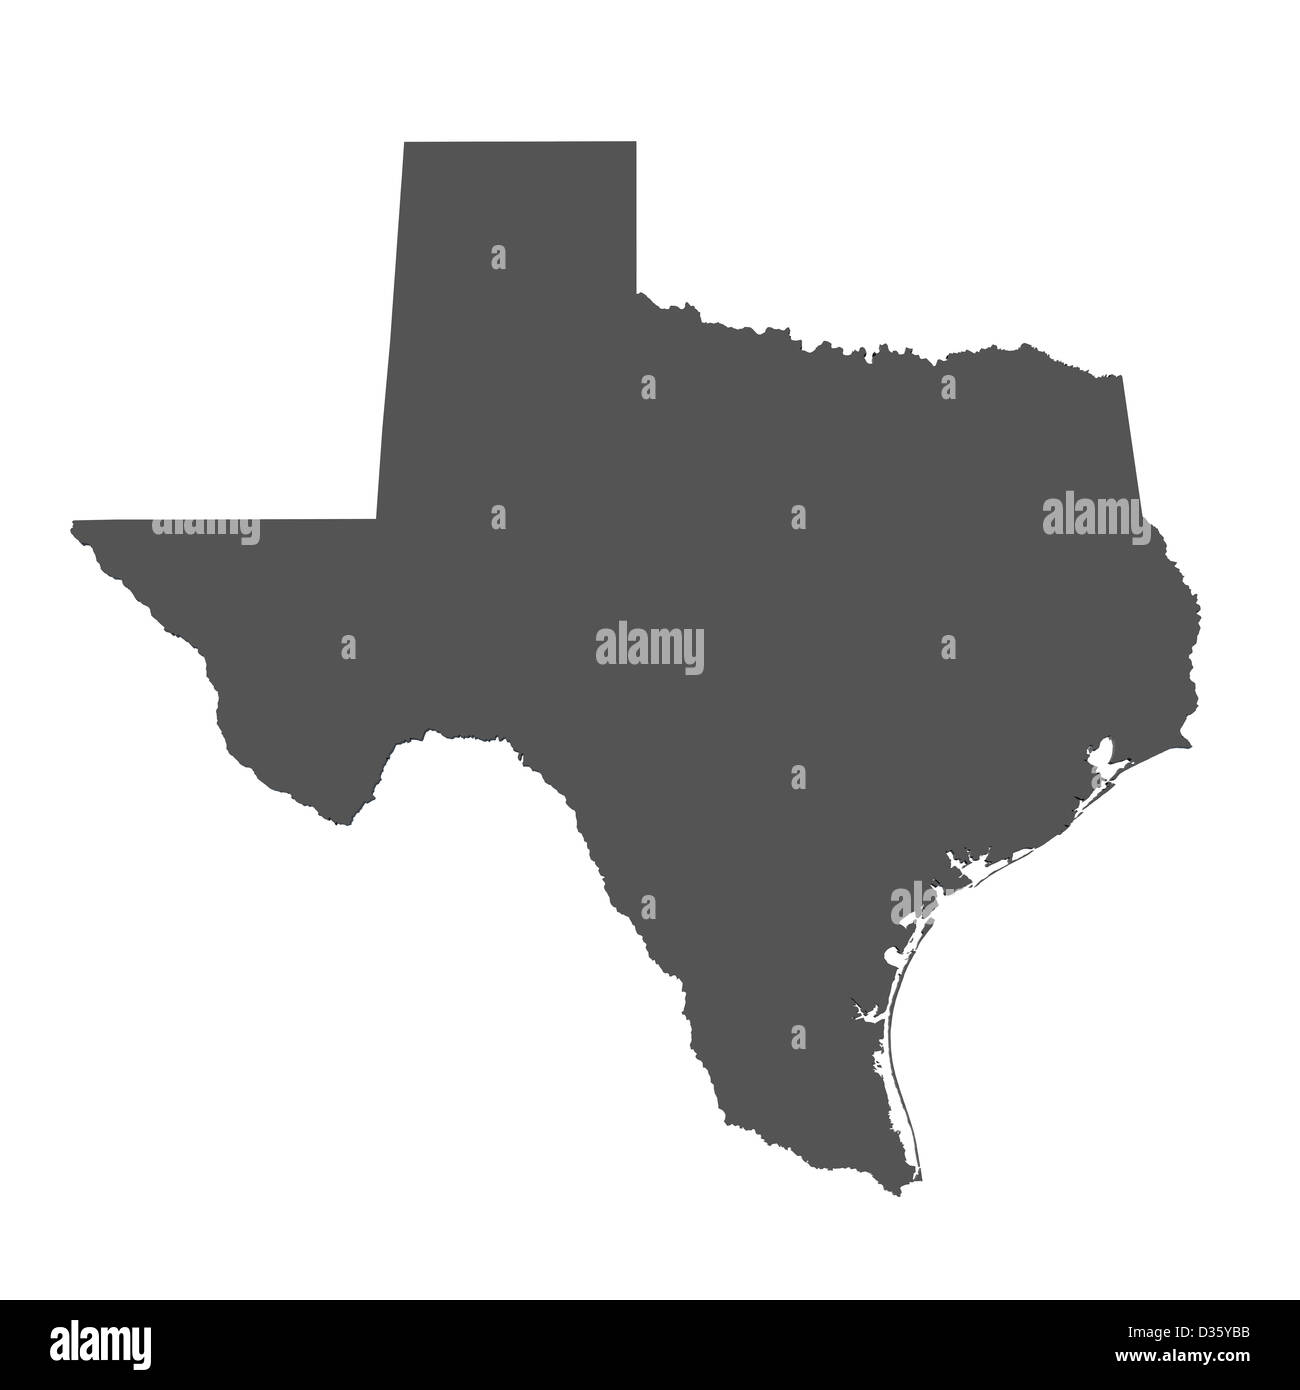 Map of the state of Texas - USA Stock Photo